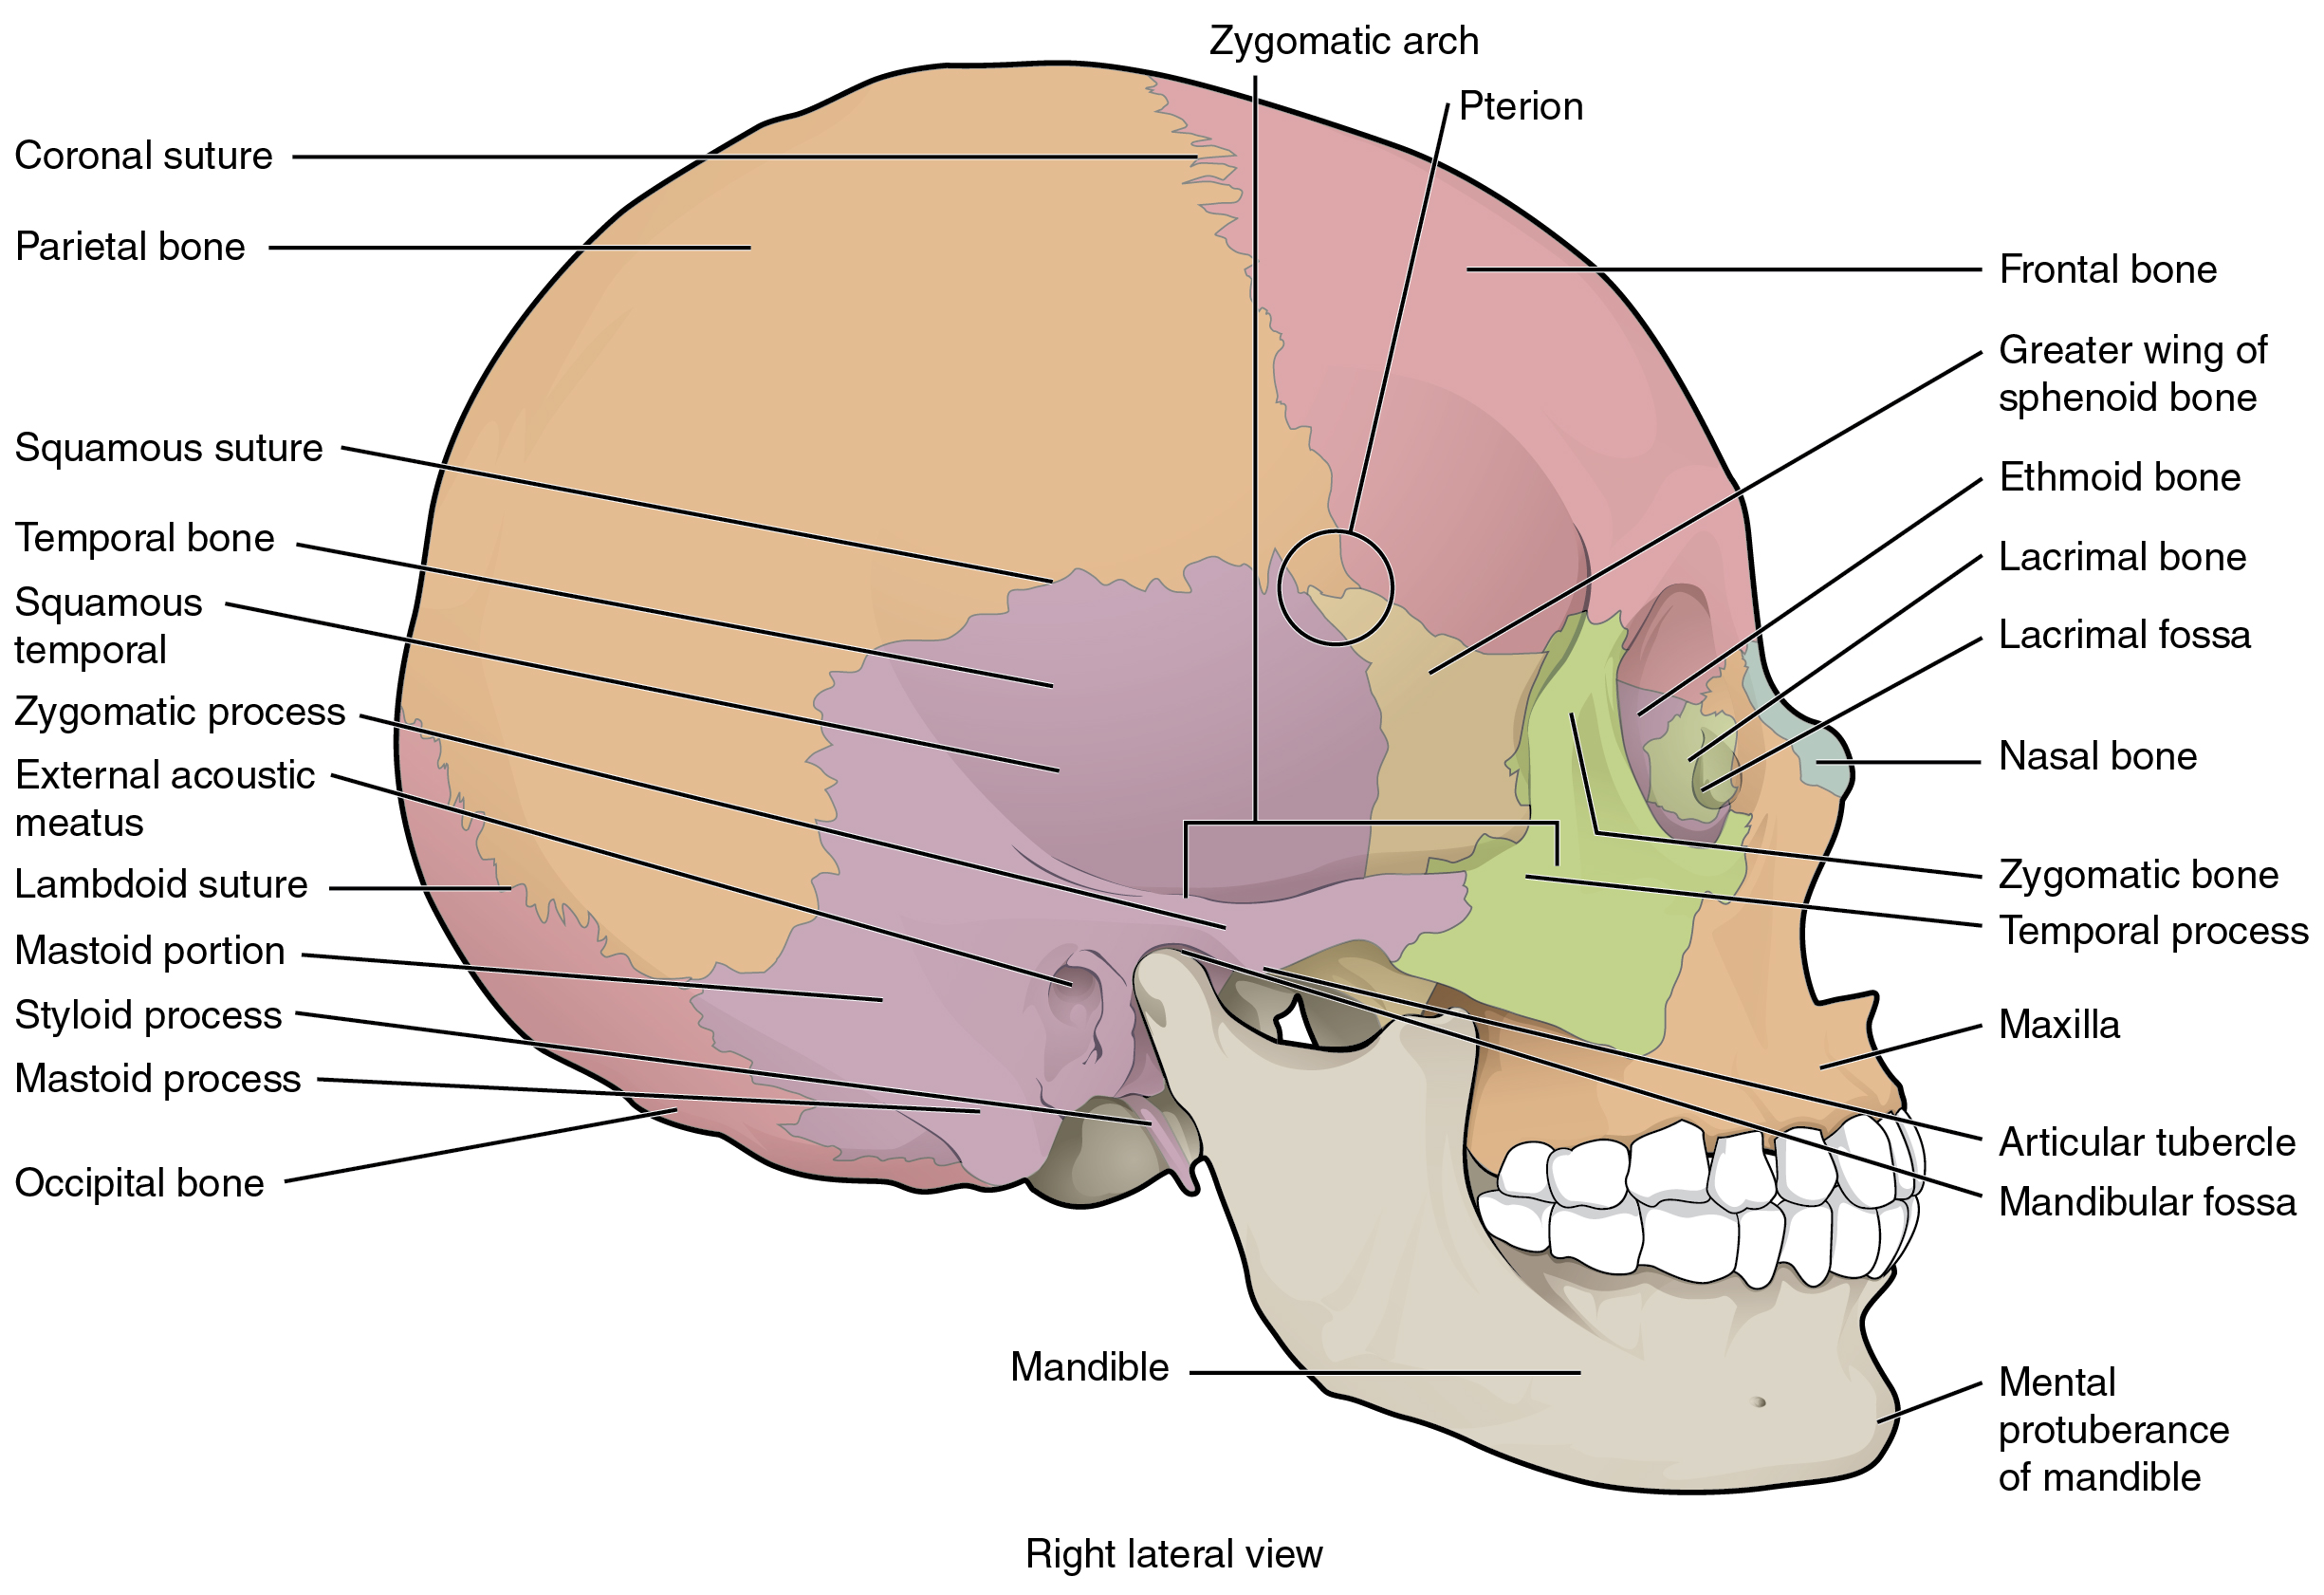 705_Lateral_View_of_Skull-01-1.jpg